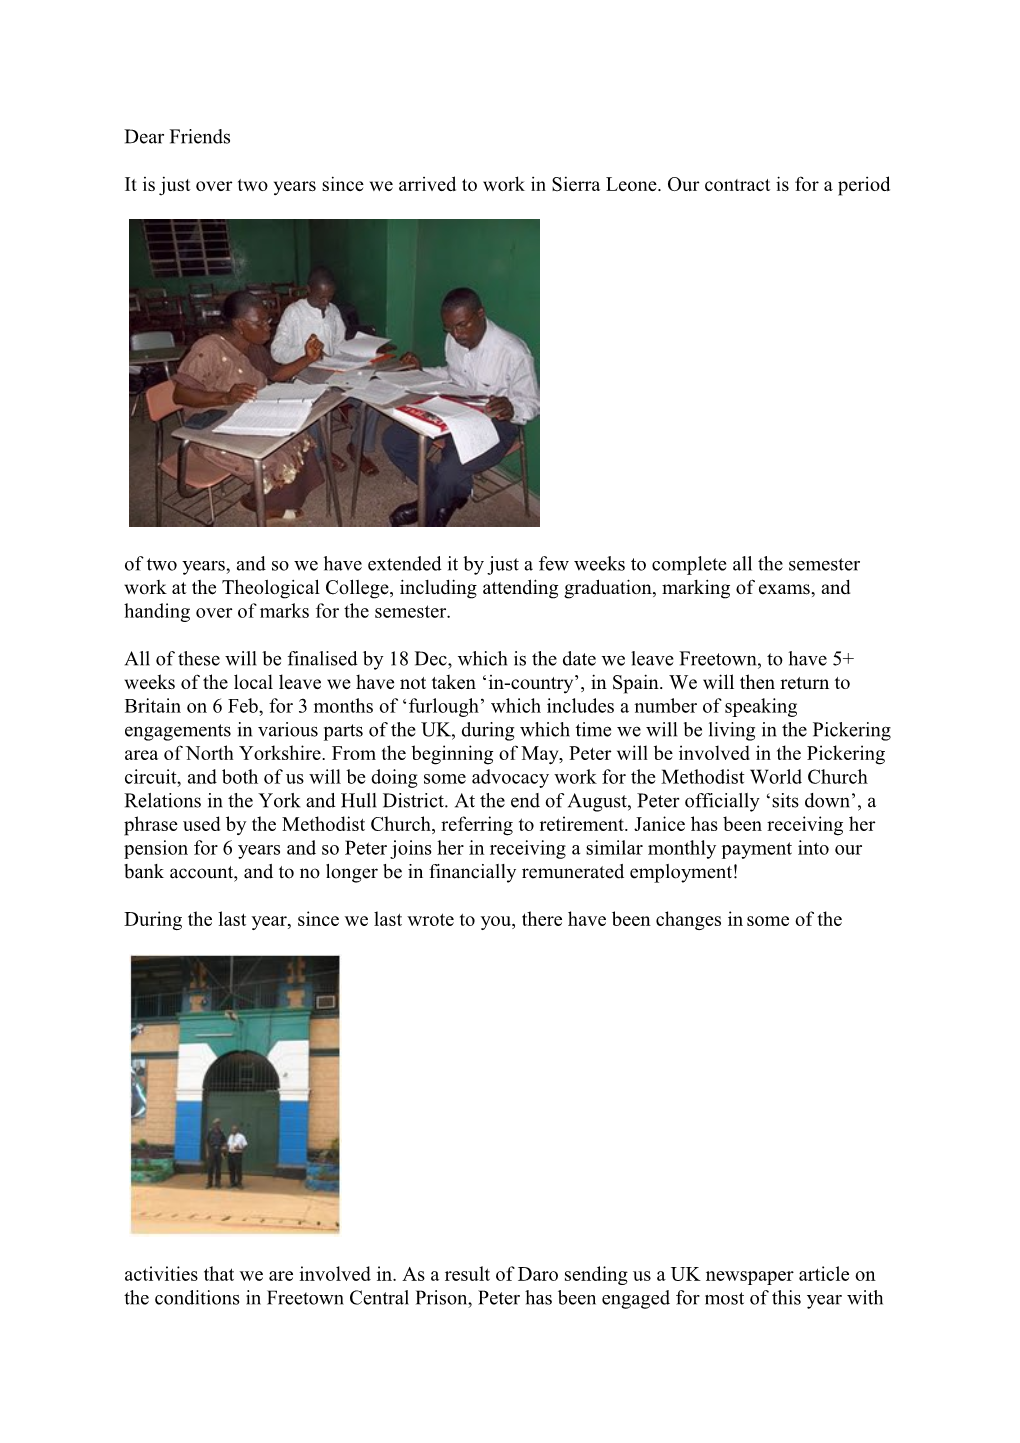 It Is Just Over Two Years Since We Arrived to Work in Sierra Leone. Our Contract Is For